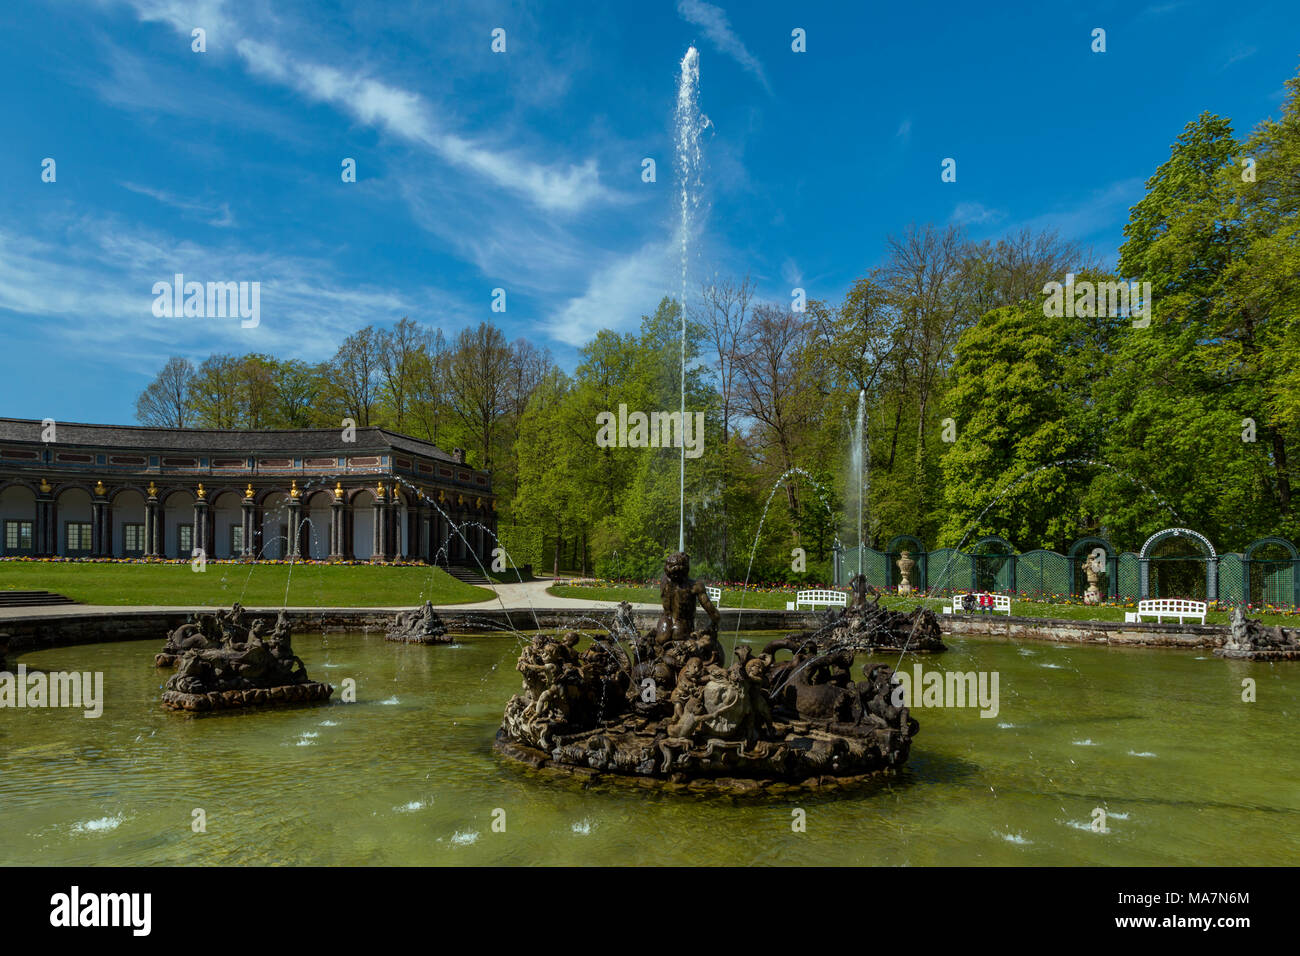 The Eremitage's garden is the largest park in Bayreuth. Fountains are dated 19th century Stock Photo